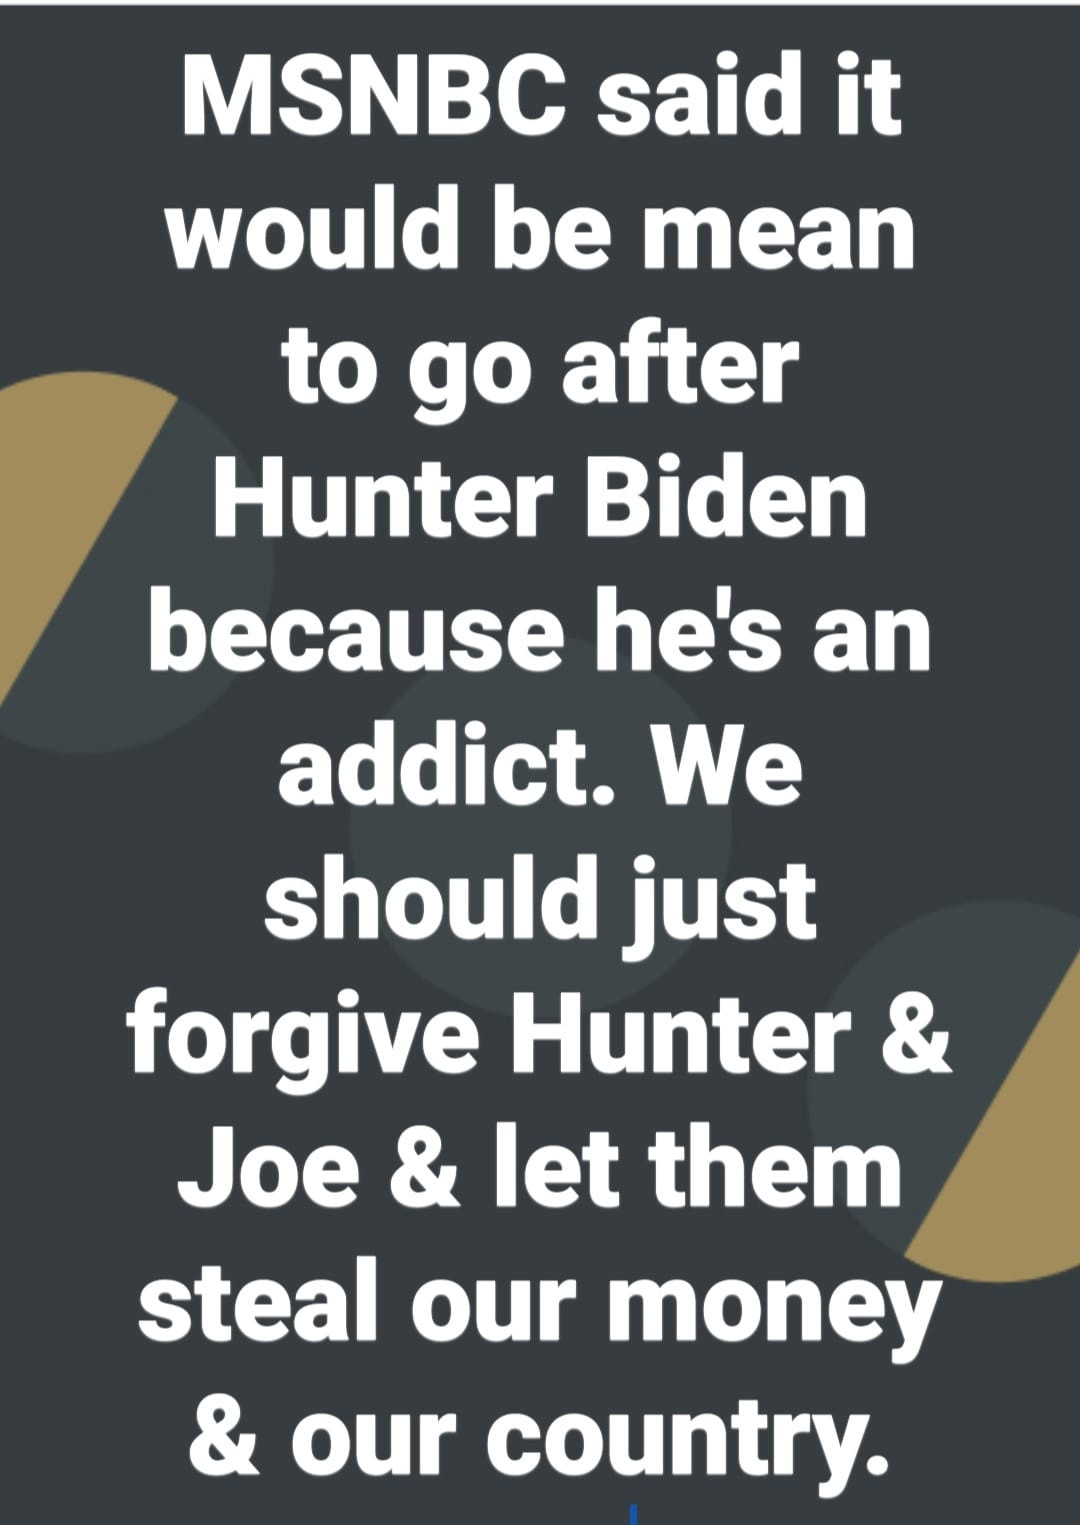 May be an image of text that says 'MSNBC said it would be mean to go after Hunter Biden because he's an addict. We should just forgive Hunter & Joe & let them steal our money & our country.'